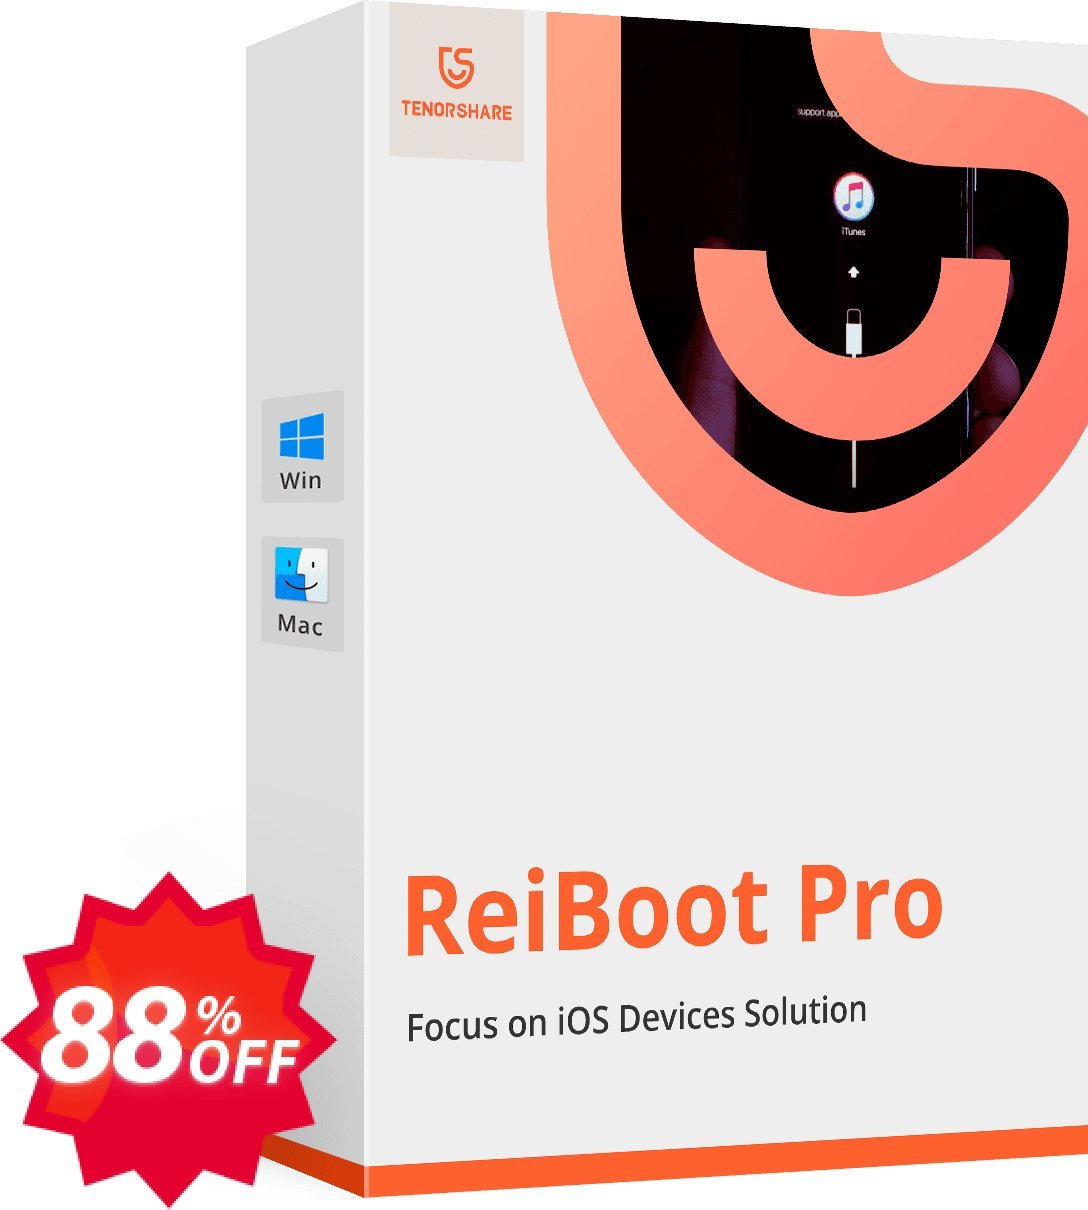 Tenorshare ReiBoot Pro, 11-15 Devices  Coupon code 88% discount 